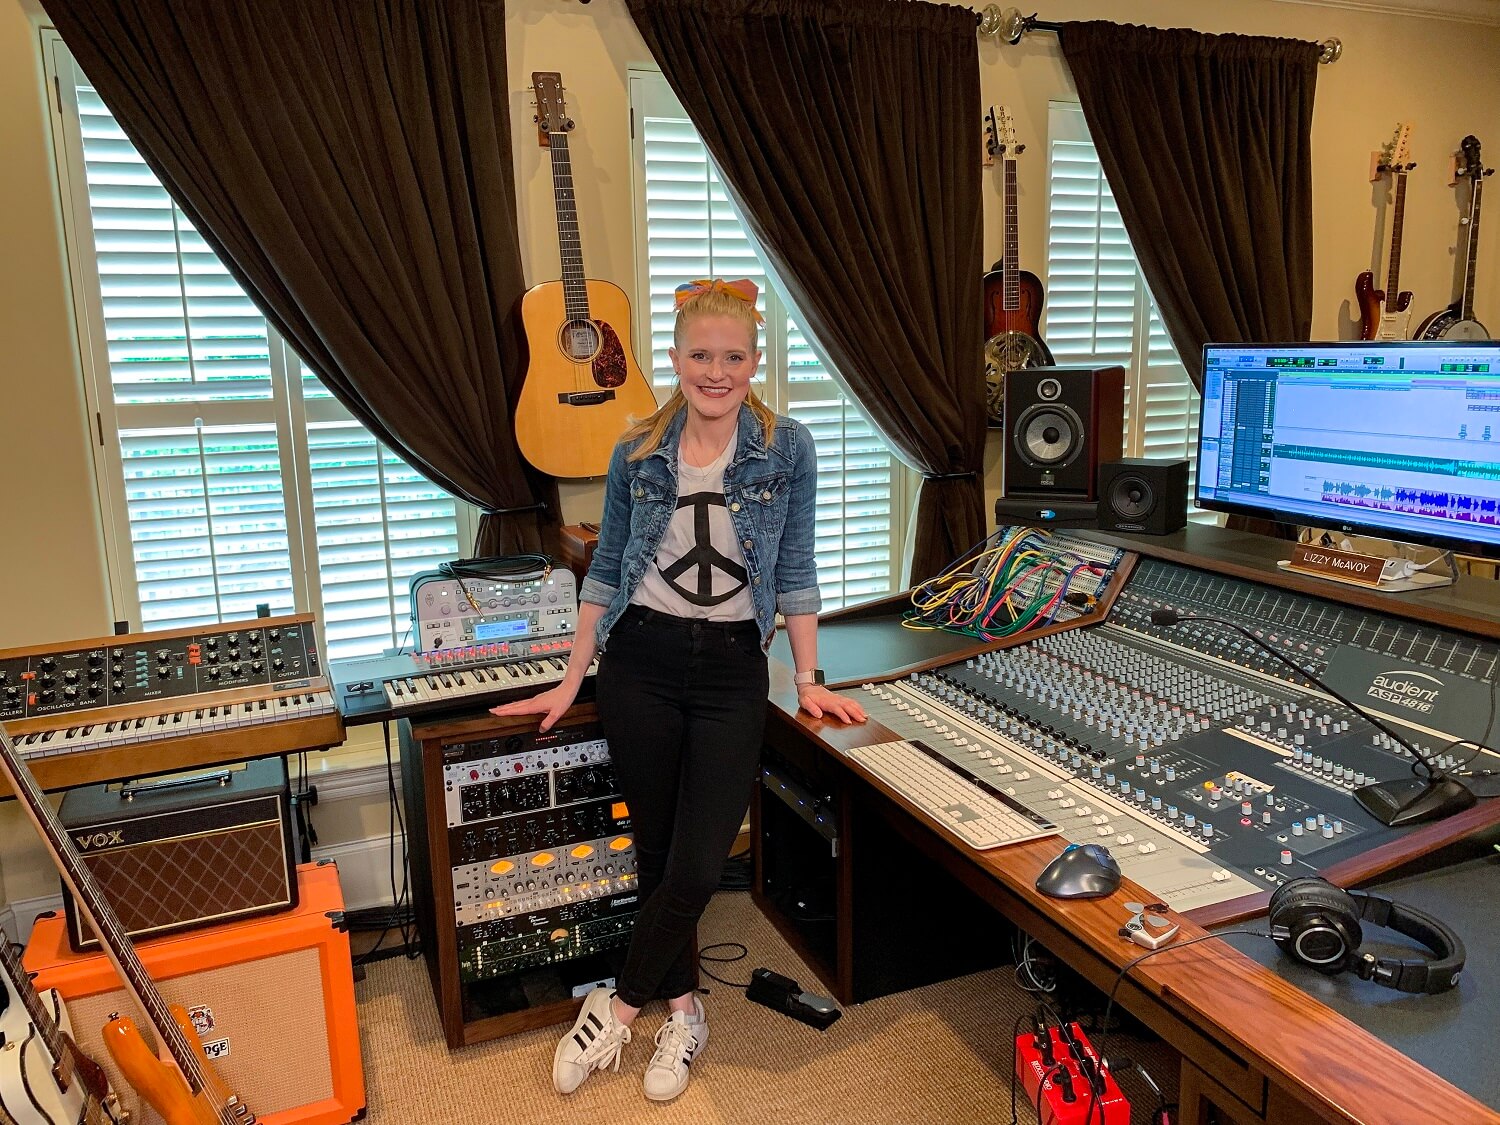 Lizzy in her studio ready to perfect her production technique